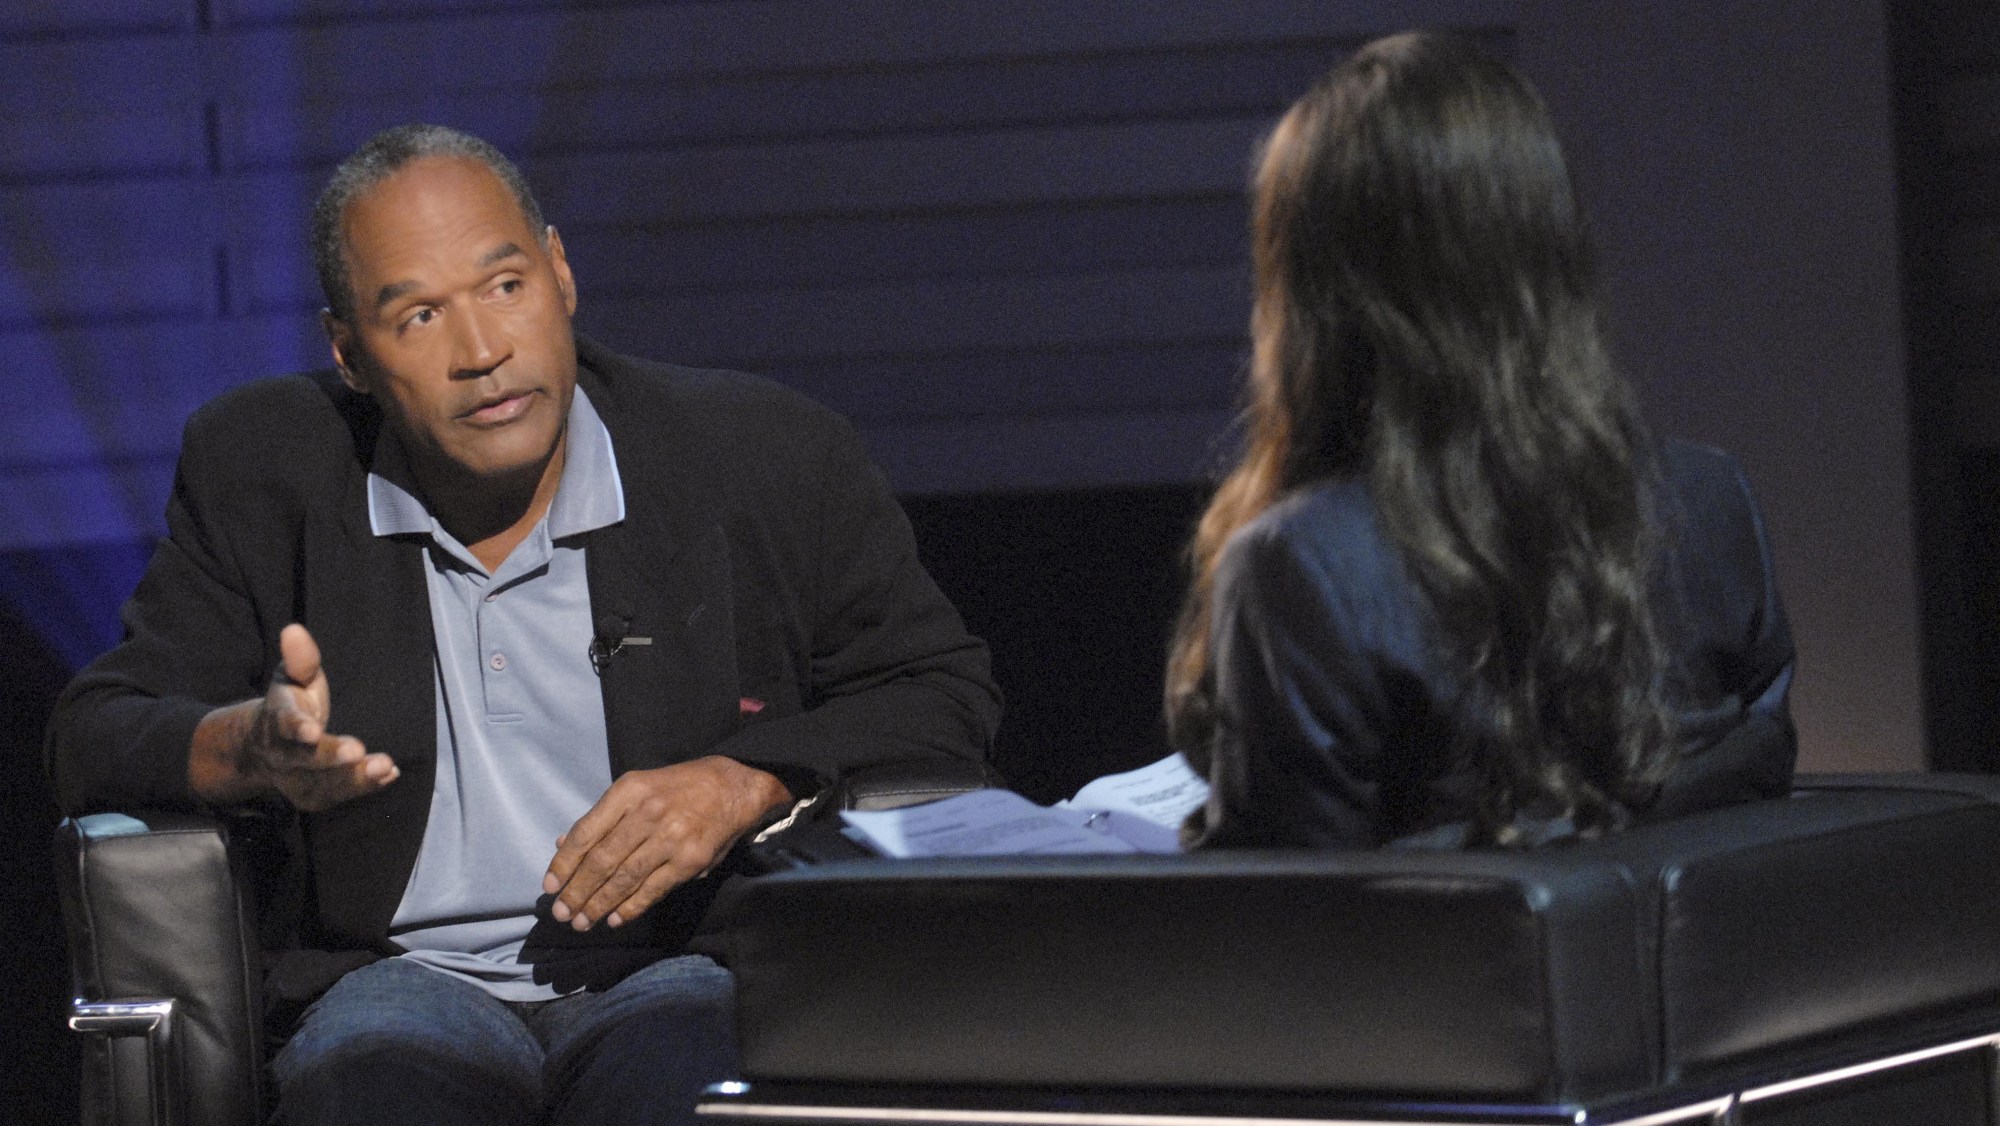 'O.J. Simpson: The Lost Confession?,' which aired in 2018, featured a conversation between O.J. Simpson and Judith Regan.